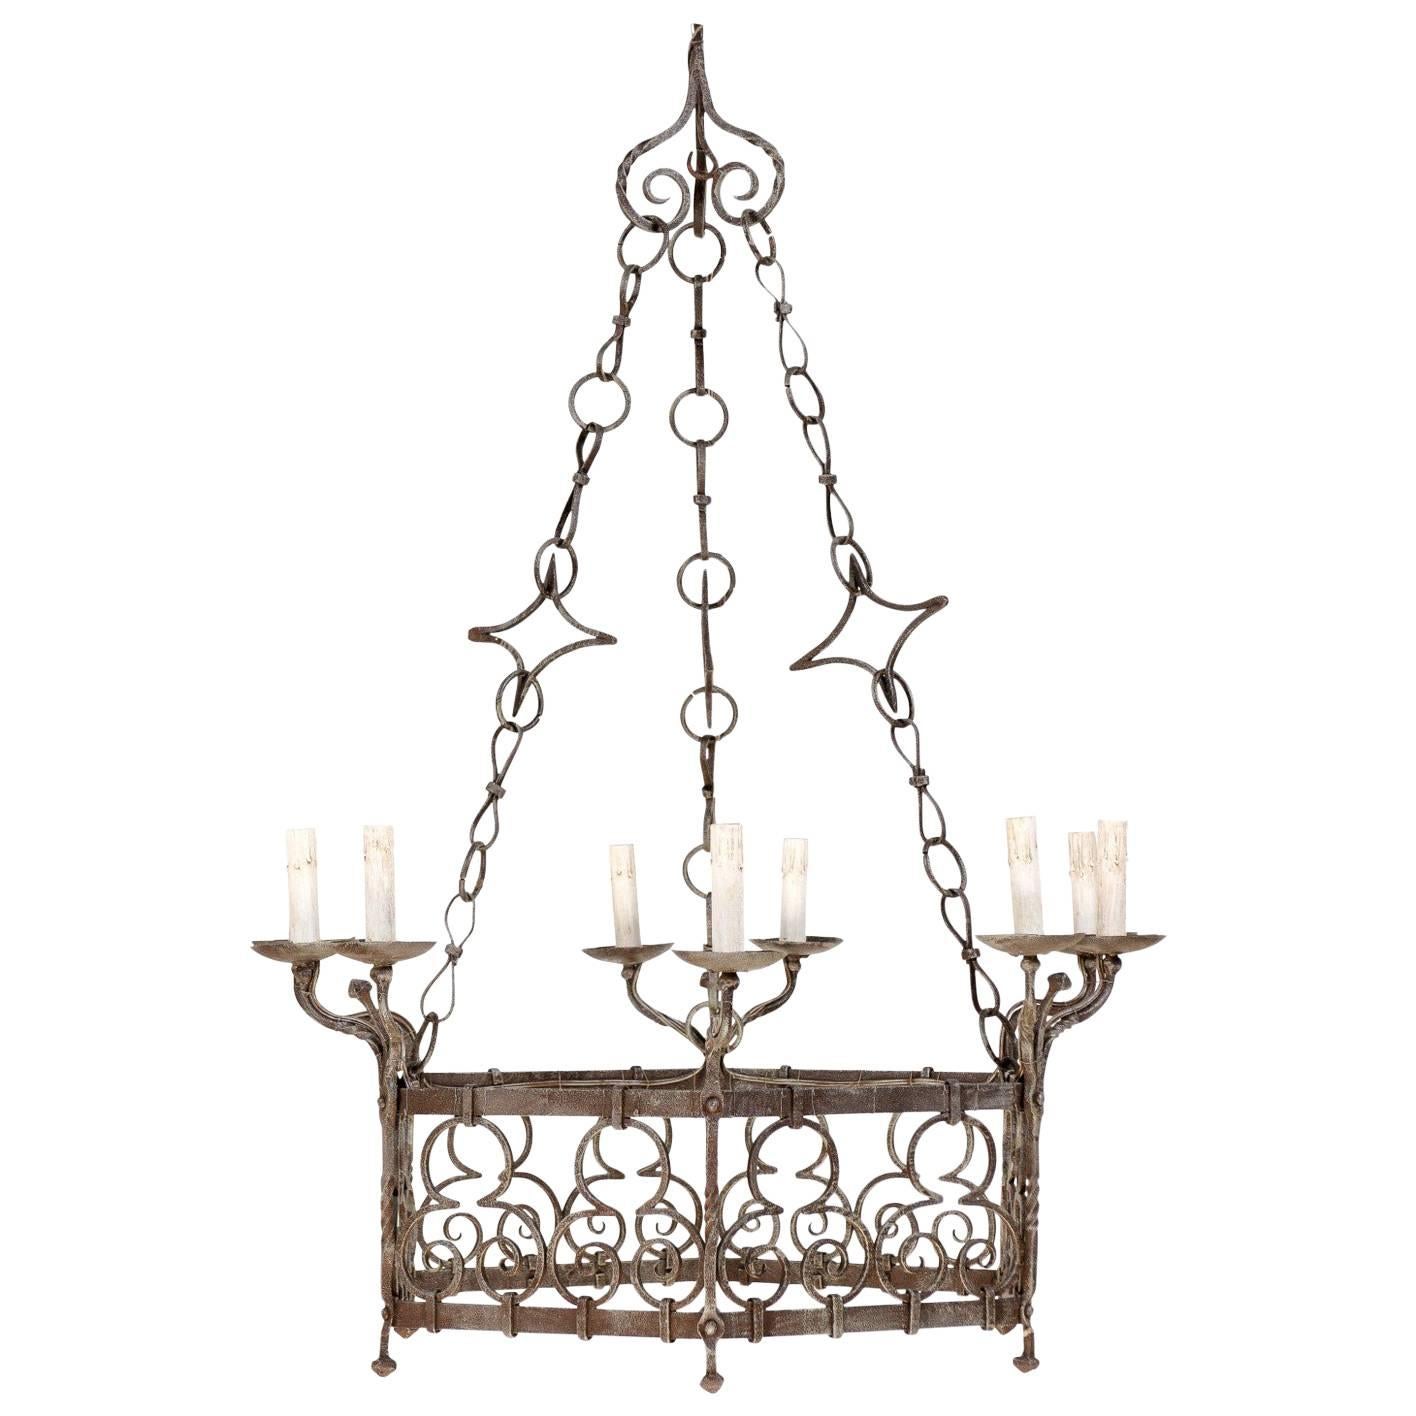 A Beautiful French Gothic Style Nine Light Vintage Iron Chandelier, Rewired